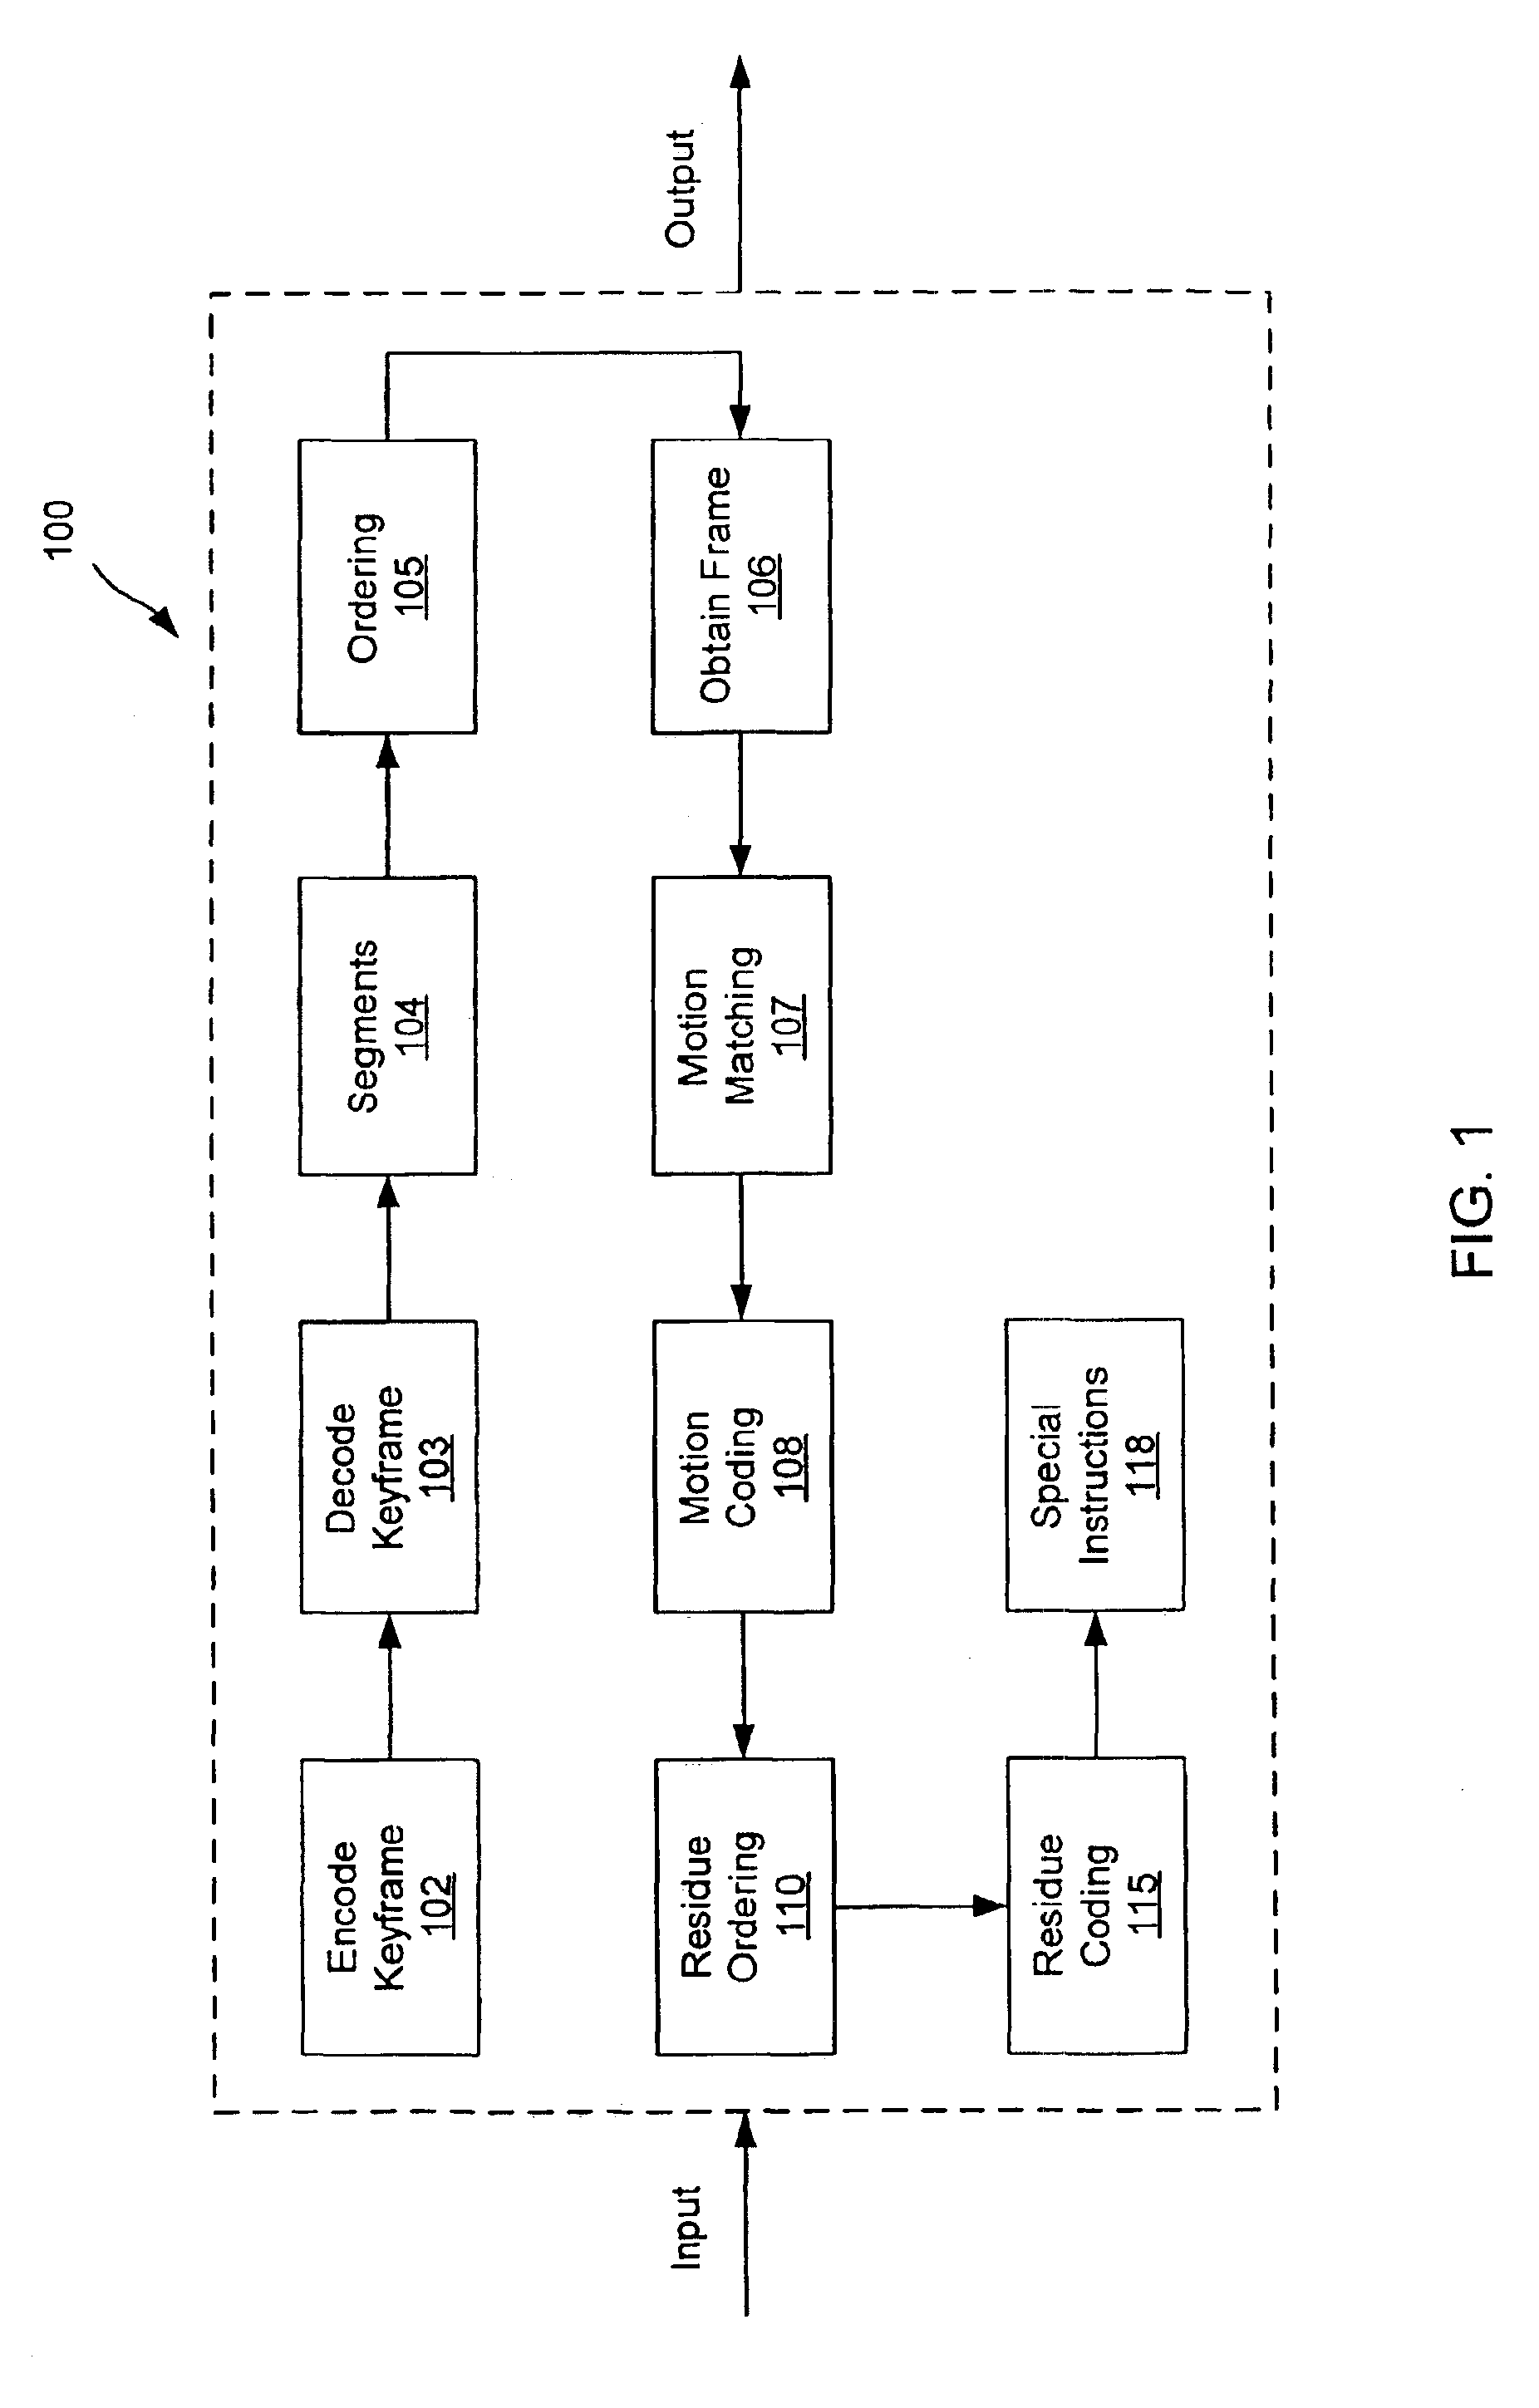 Method and apparatus for efficient video processing